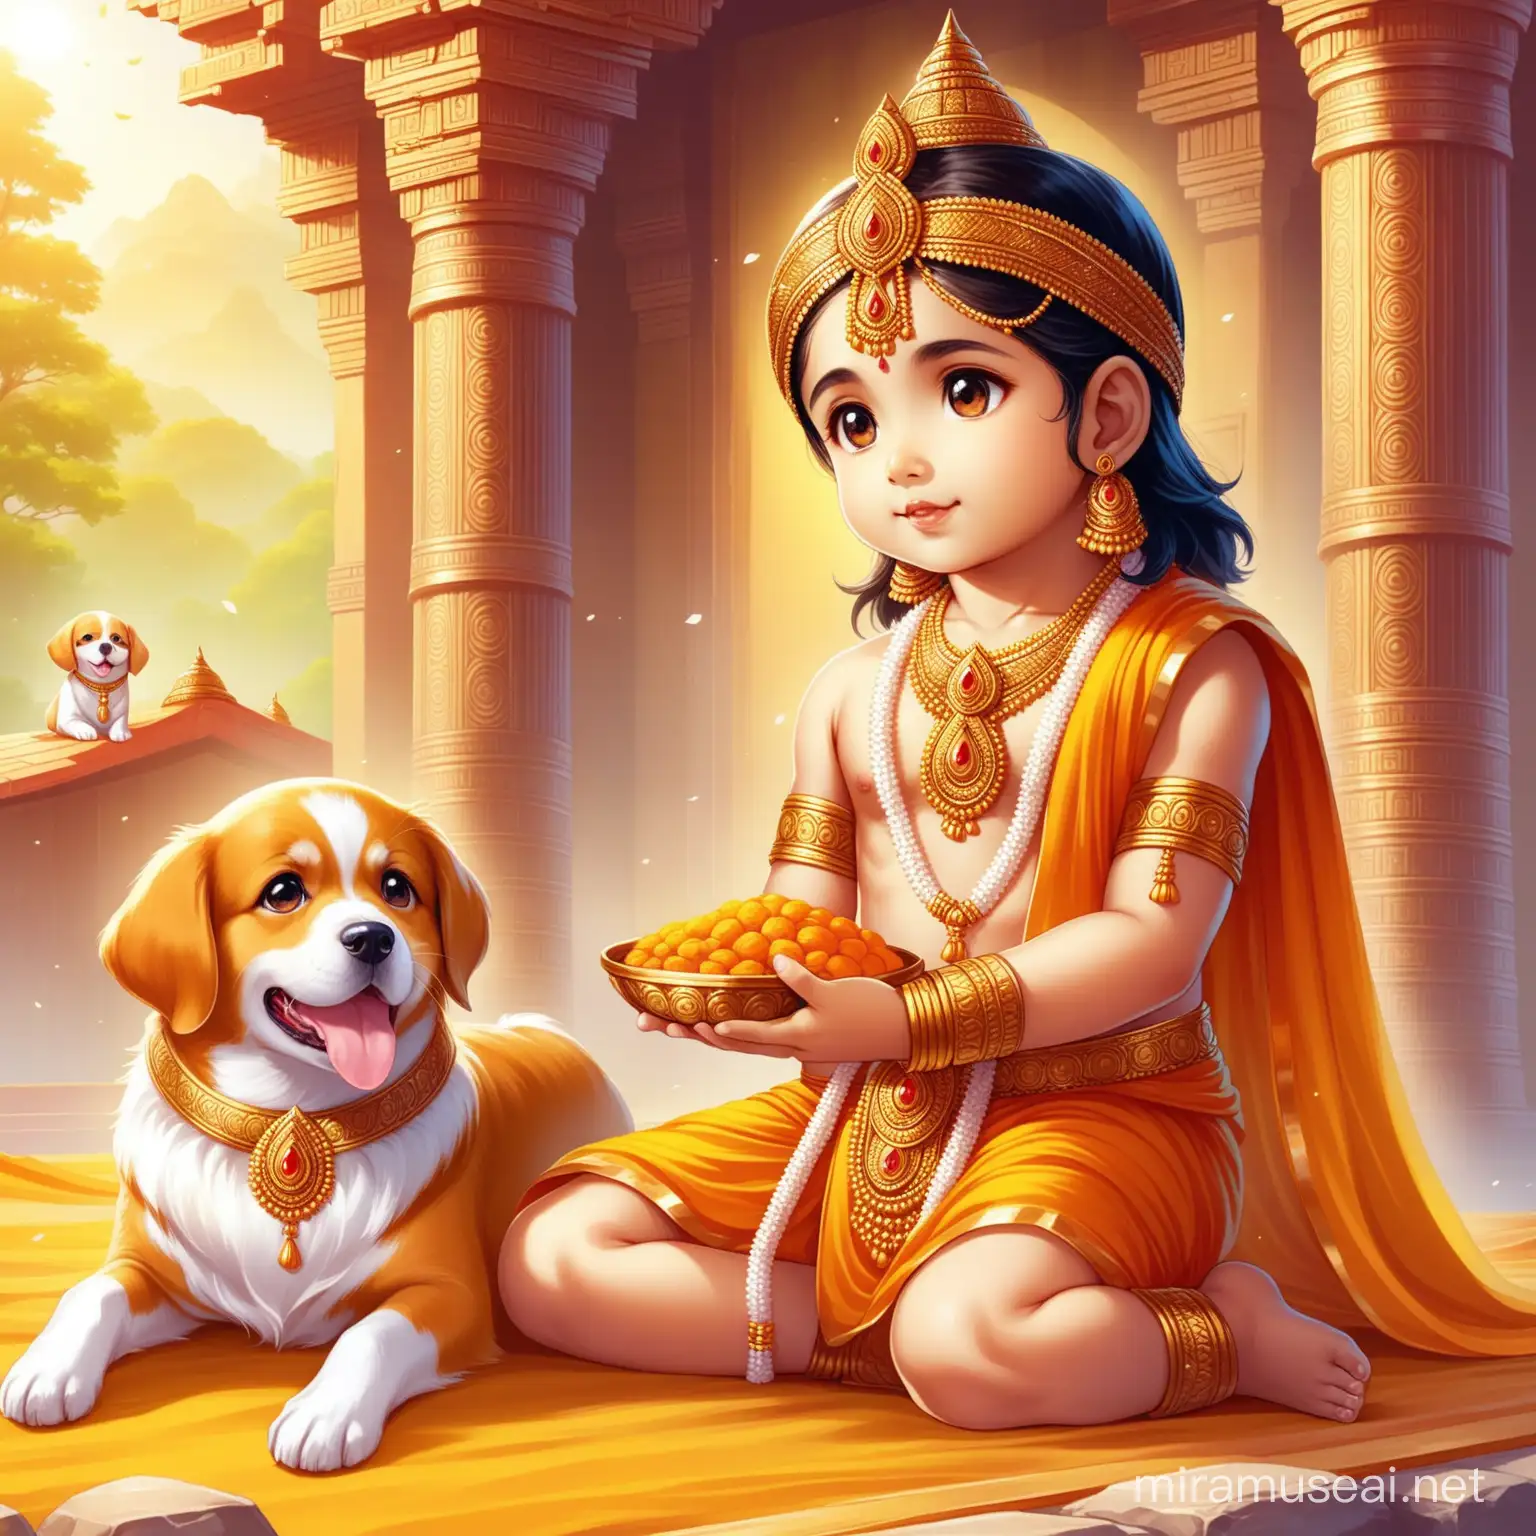 Adorable Depiction of Lord Shree Rams Childhood with a Playful Dog